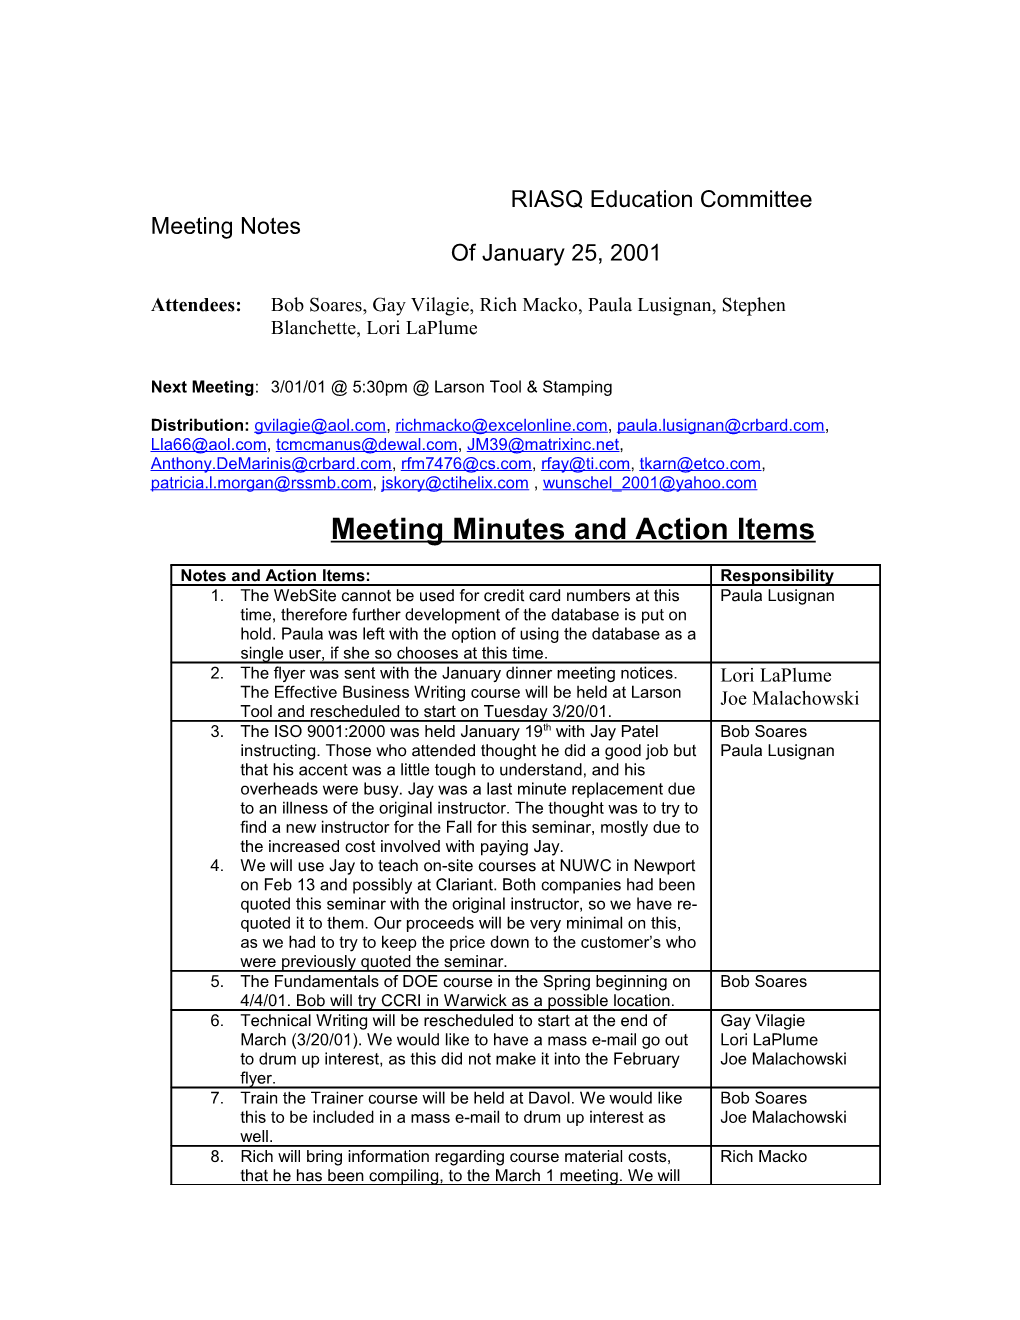 RIASQ Education Committee Meeting Notes